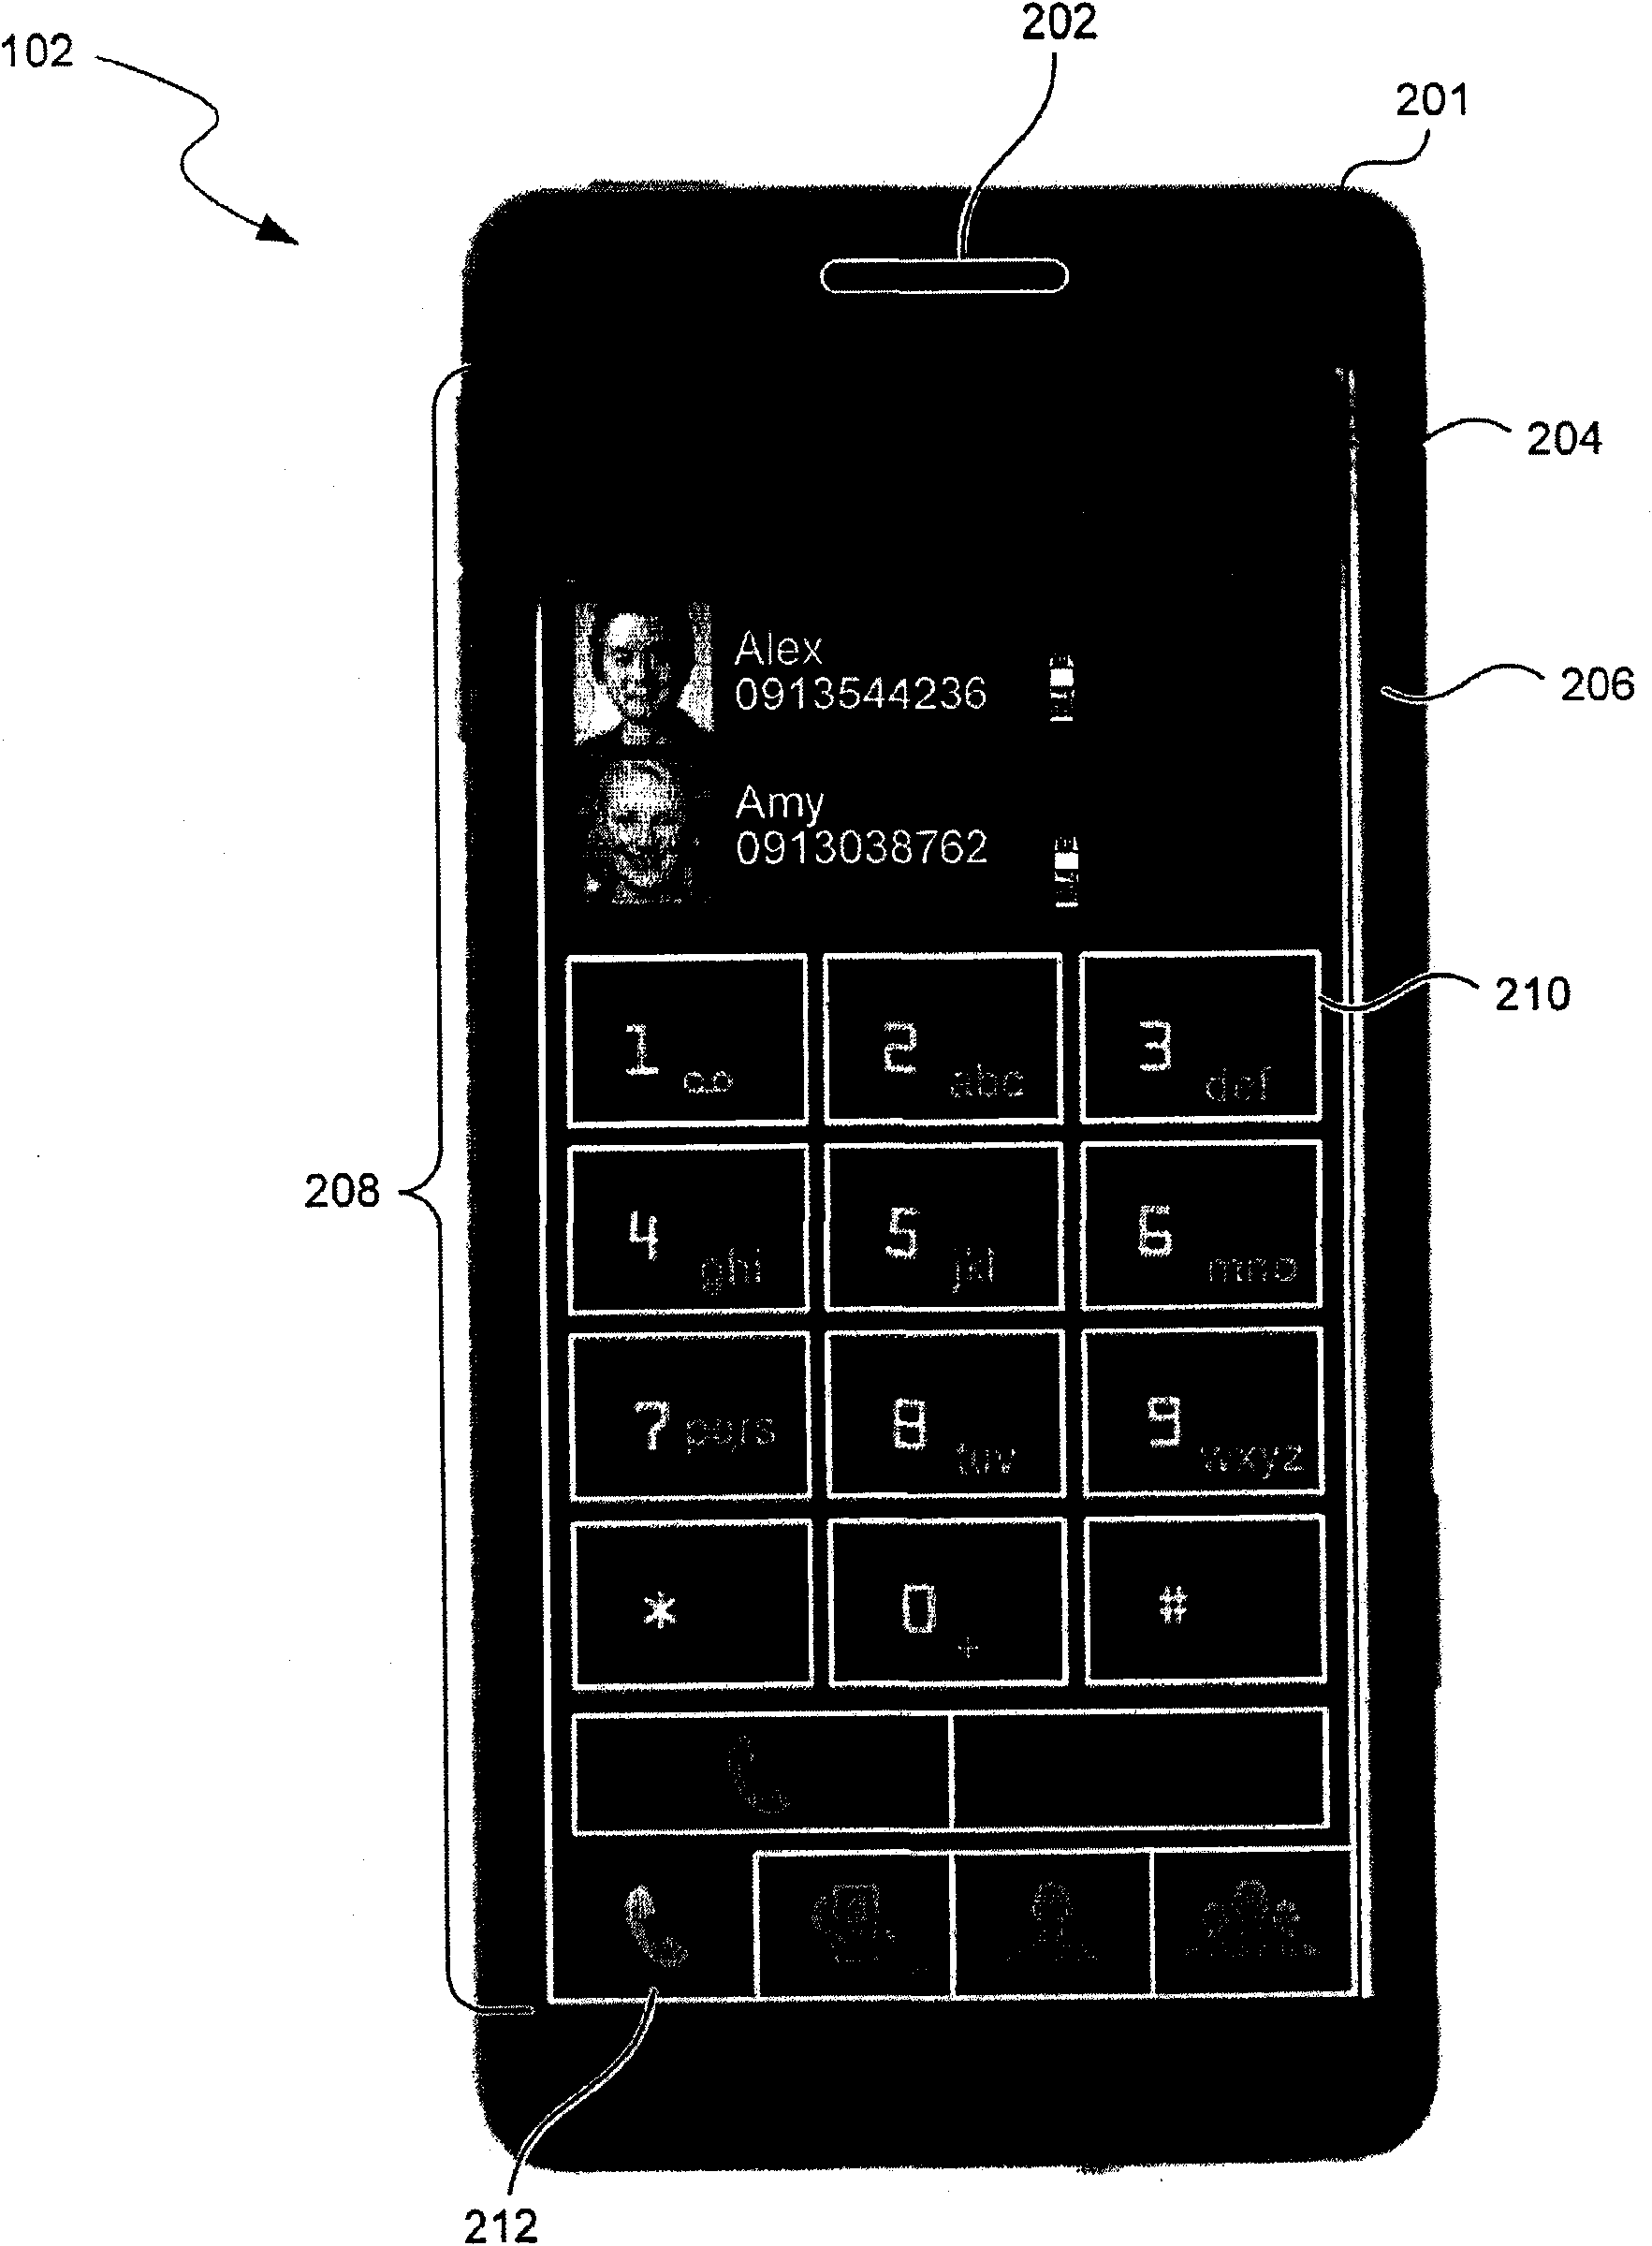 Mobile device interface with dual windows